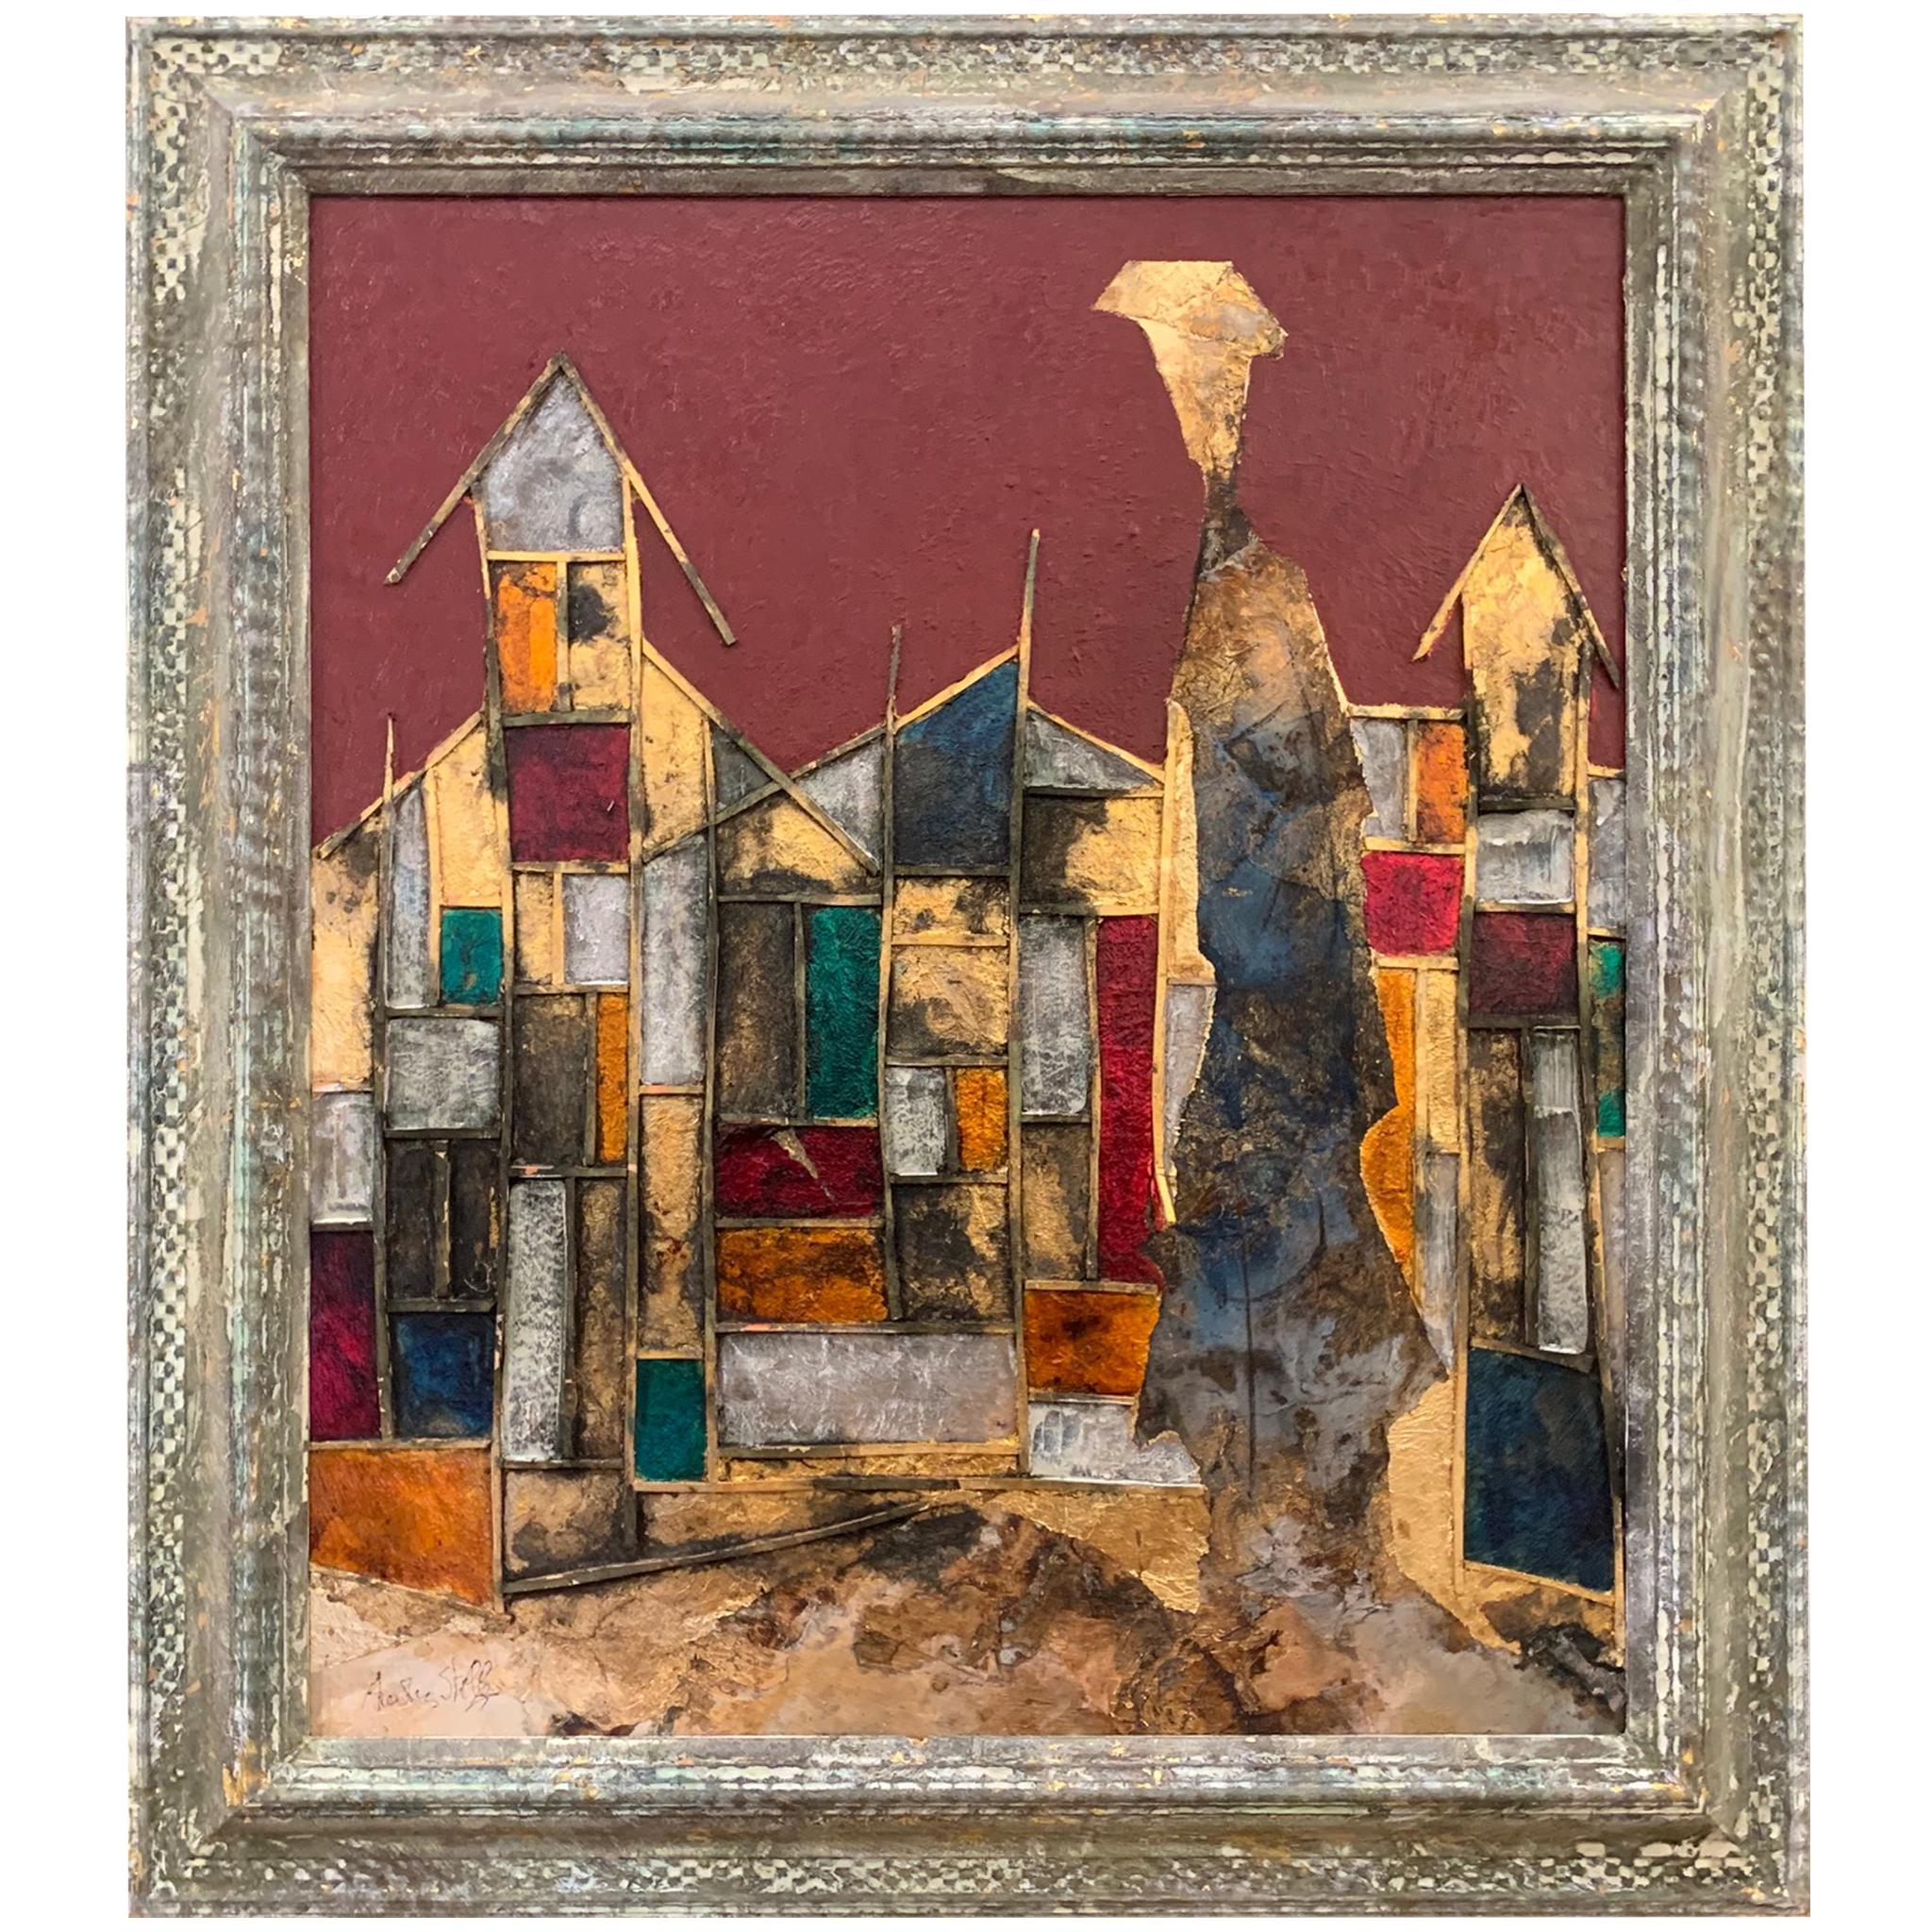 The Magical Village - Andrea Stella - Landscape Abstract Painting - Mixed Media - Contemporary Mixed Media Art by ANDREA STELLA